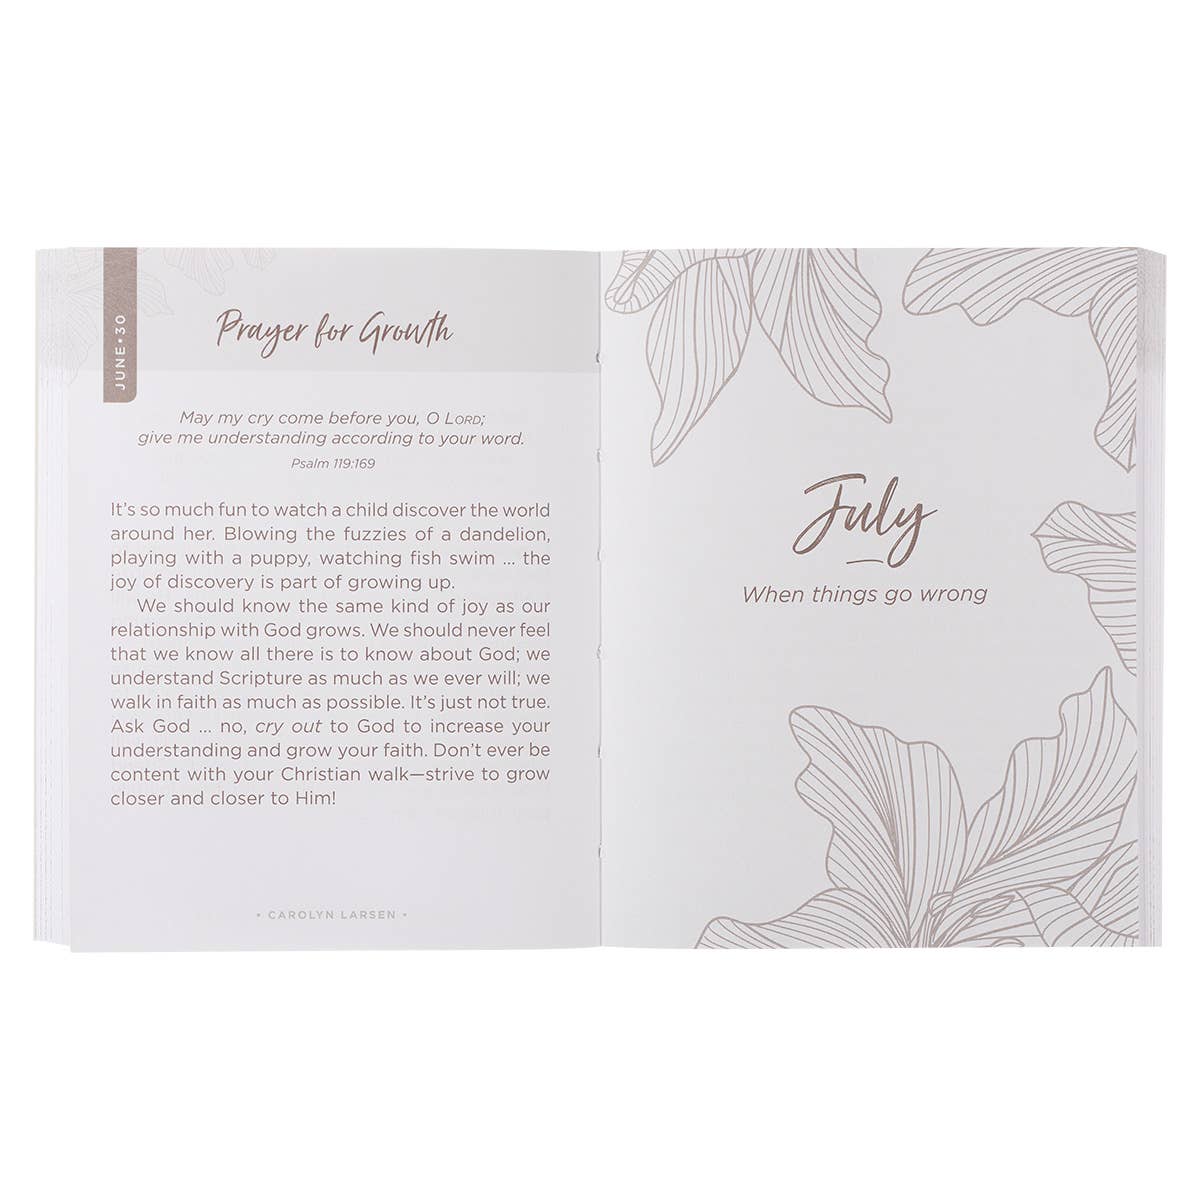 Beige Softcover One-minute Devotions for Women